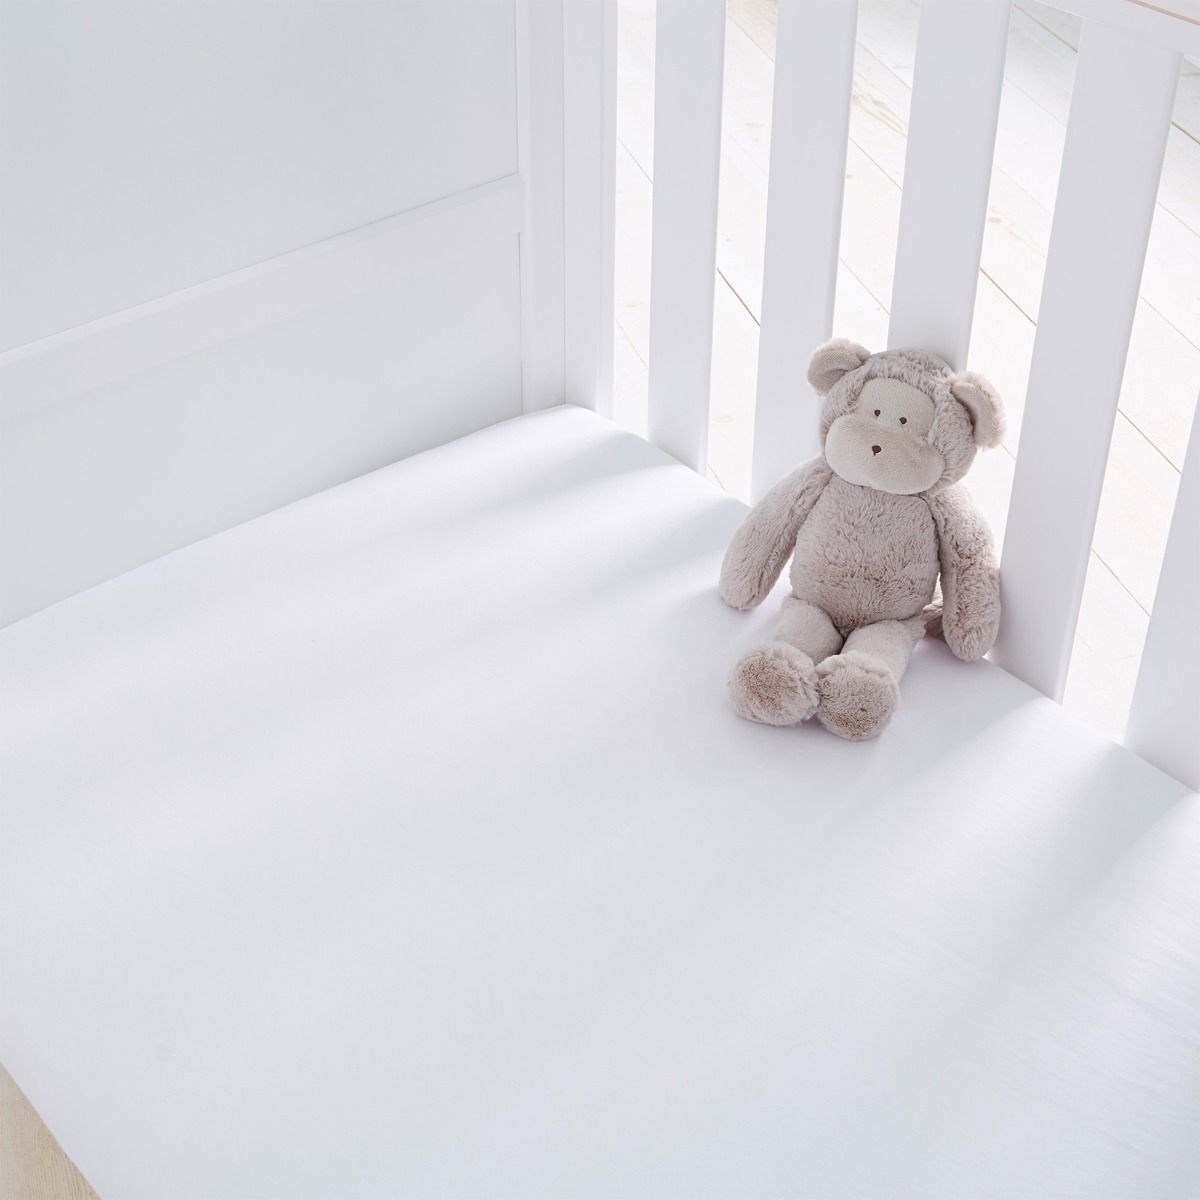 Silentnight Safe Nights 2 Pack Fitted Sheet, Cot Bed - White